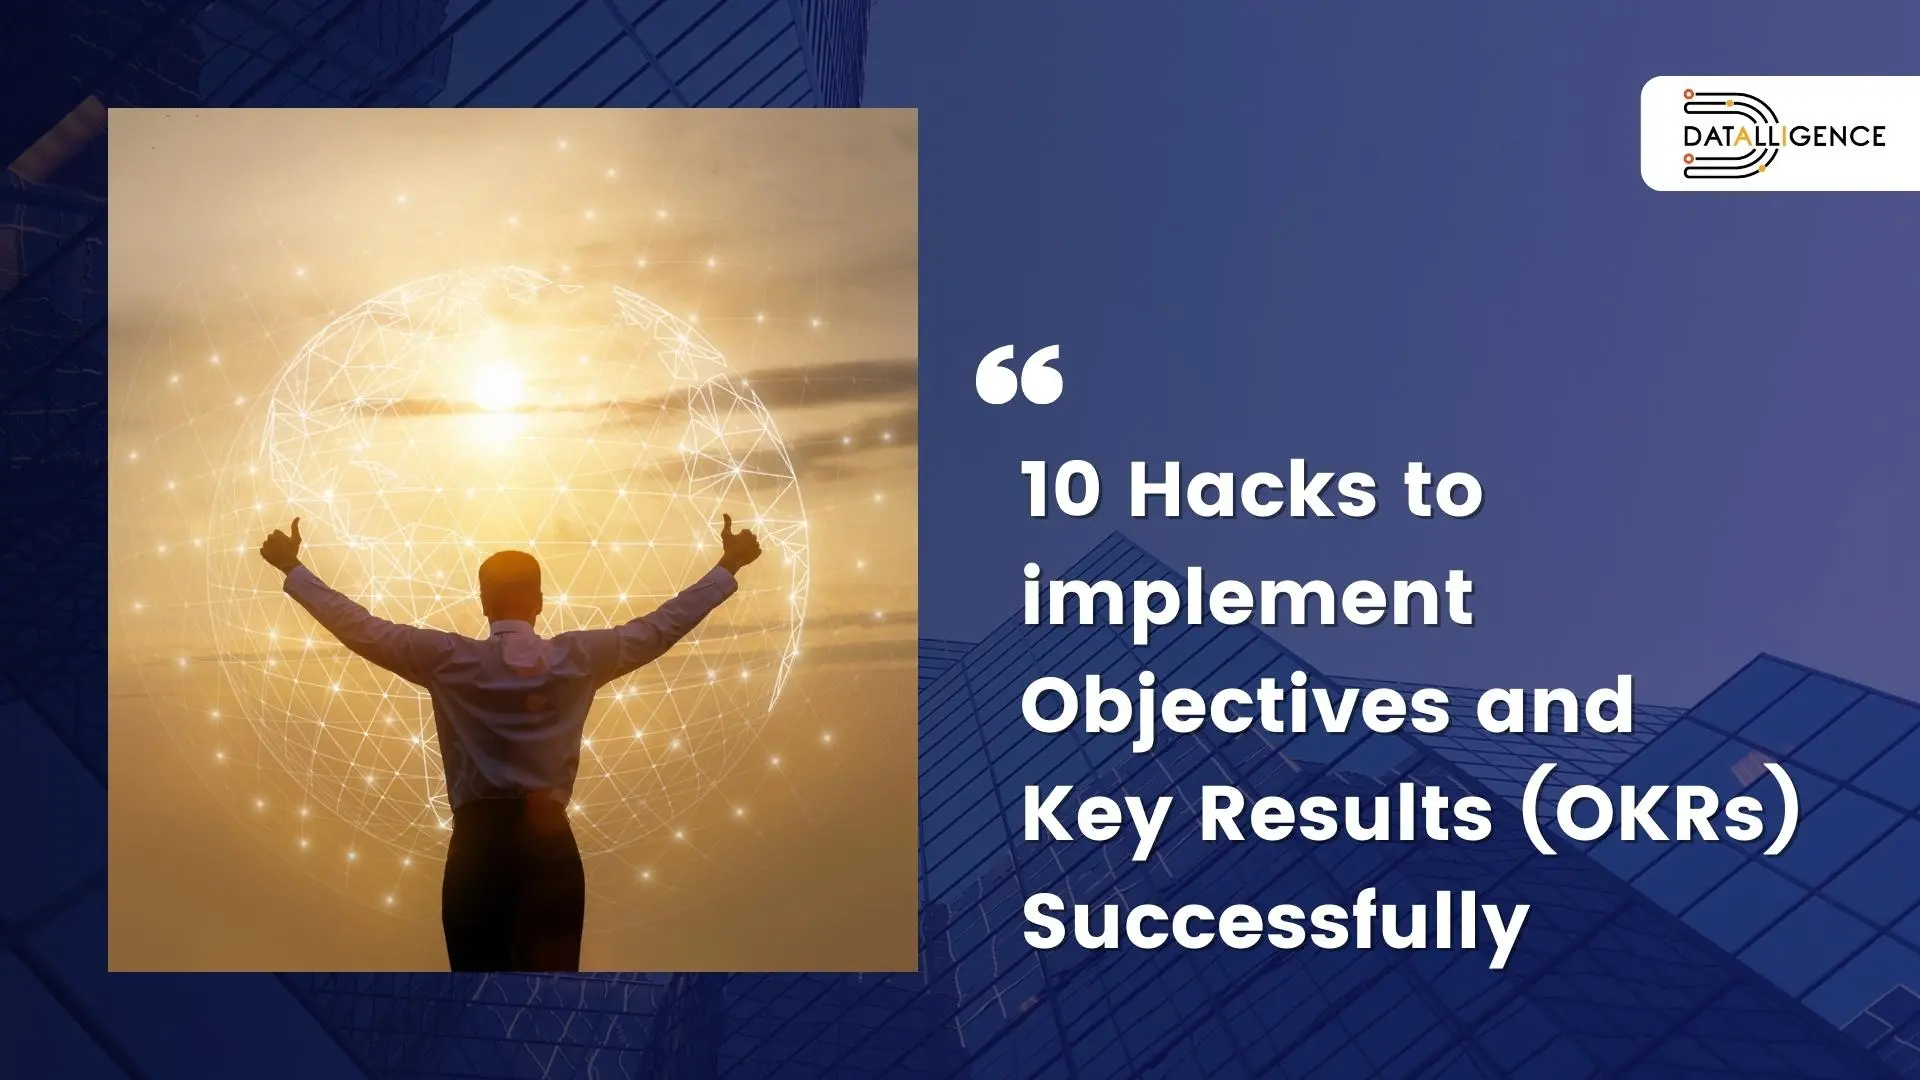 How to Implement Objectives and Key Results (OKRs) Sucessfully